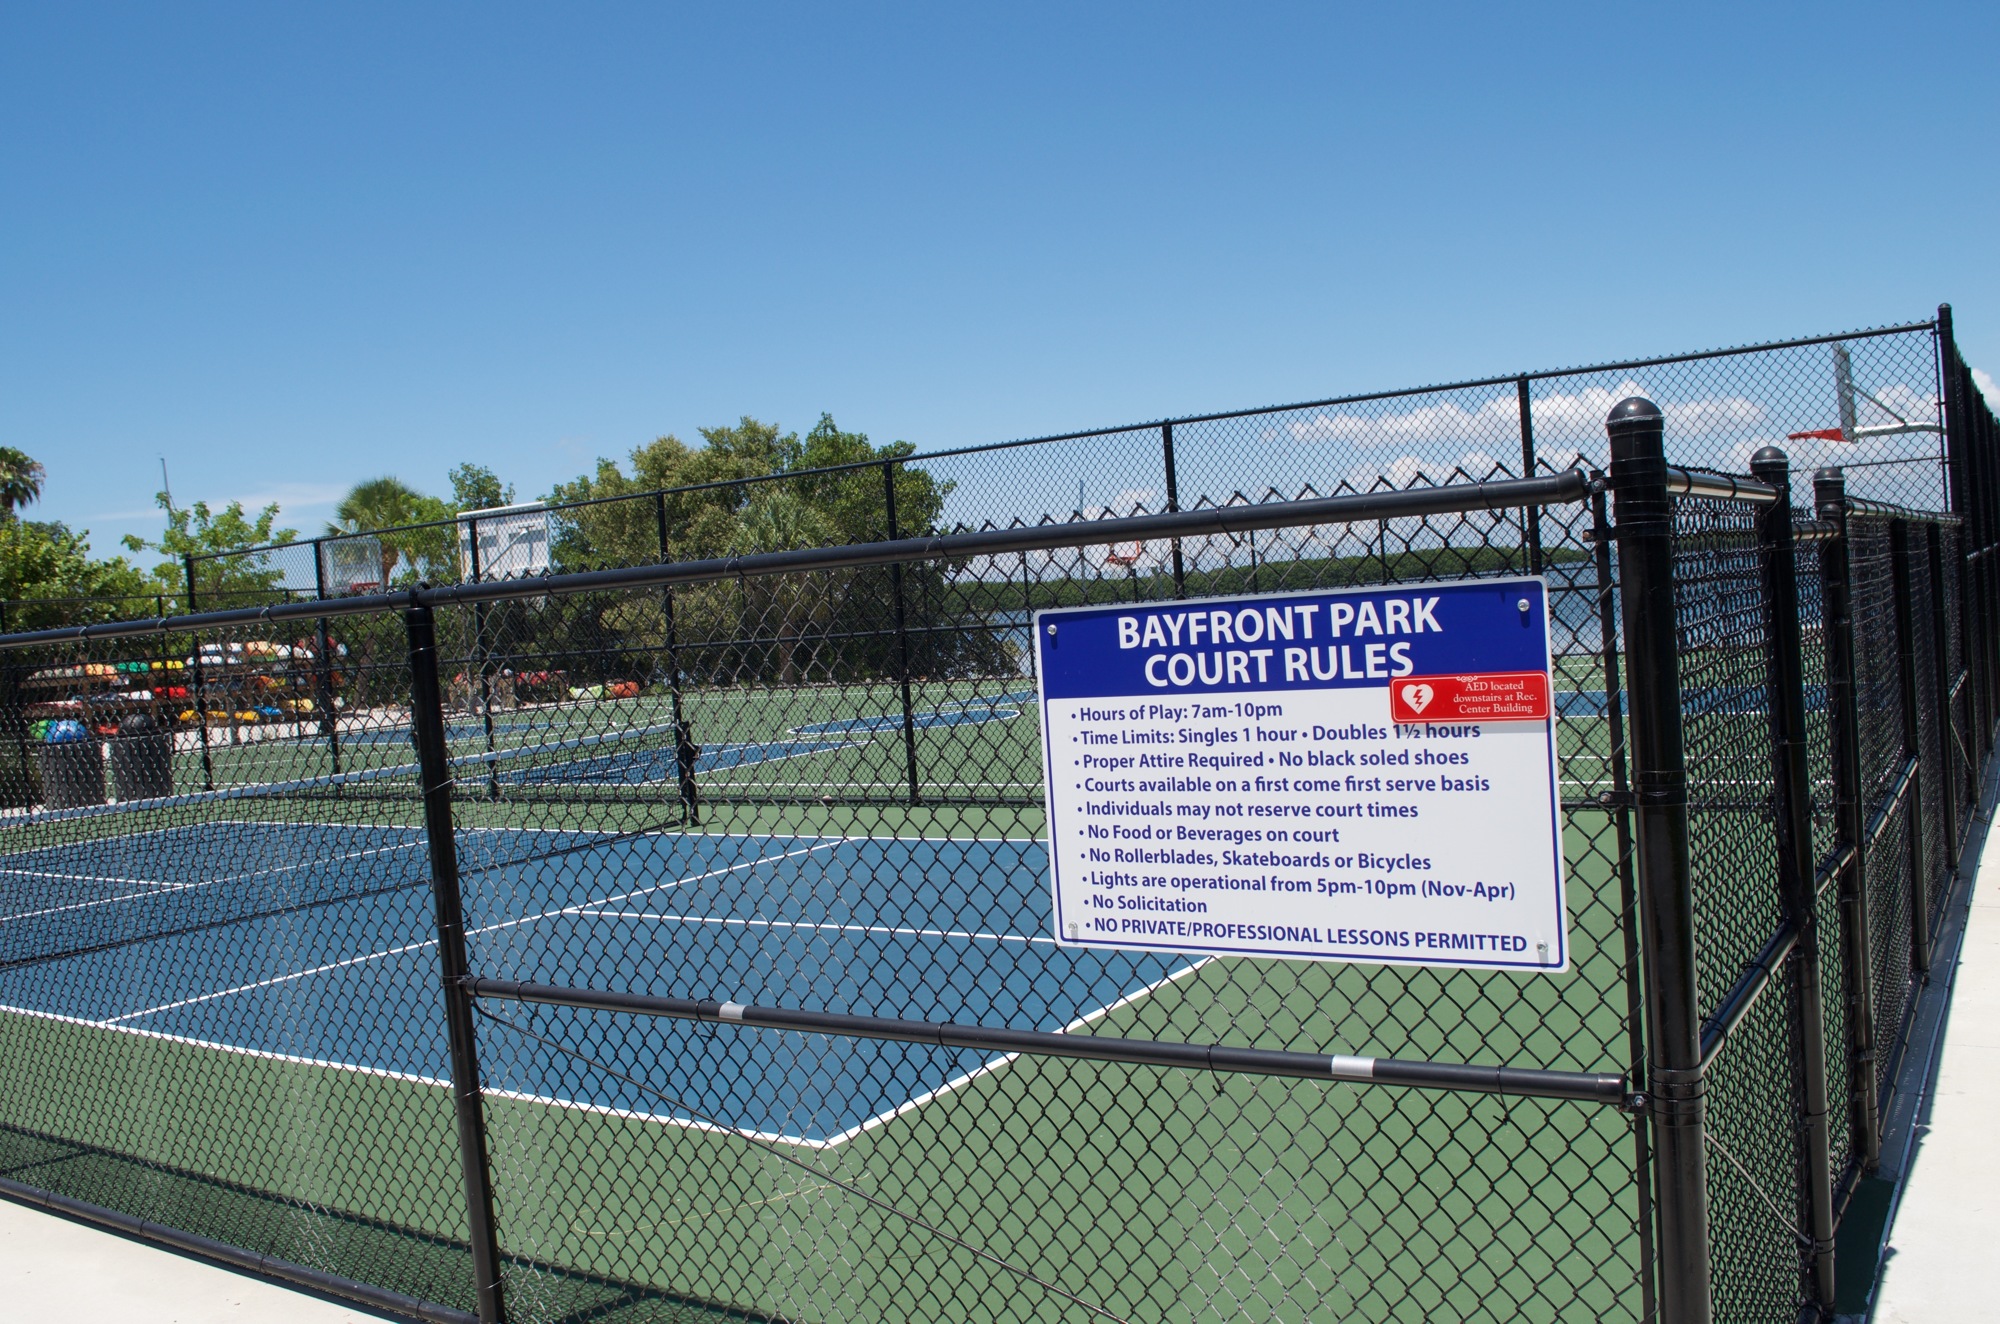 The town has one dedicated pickleball court.